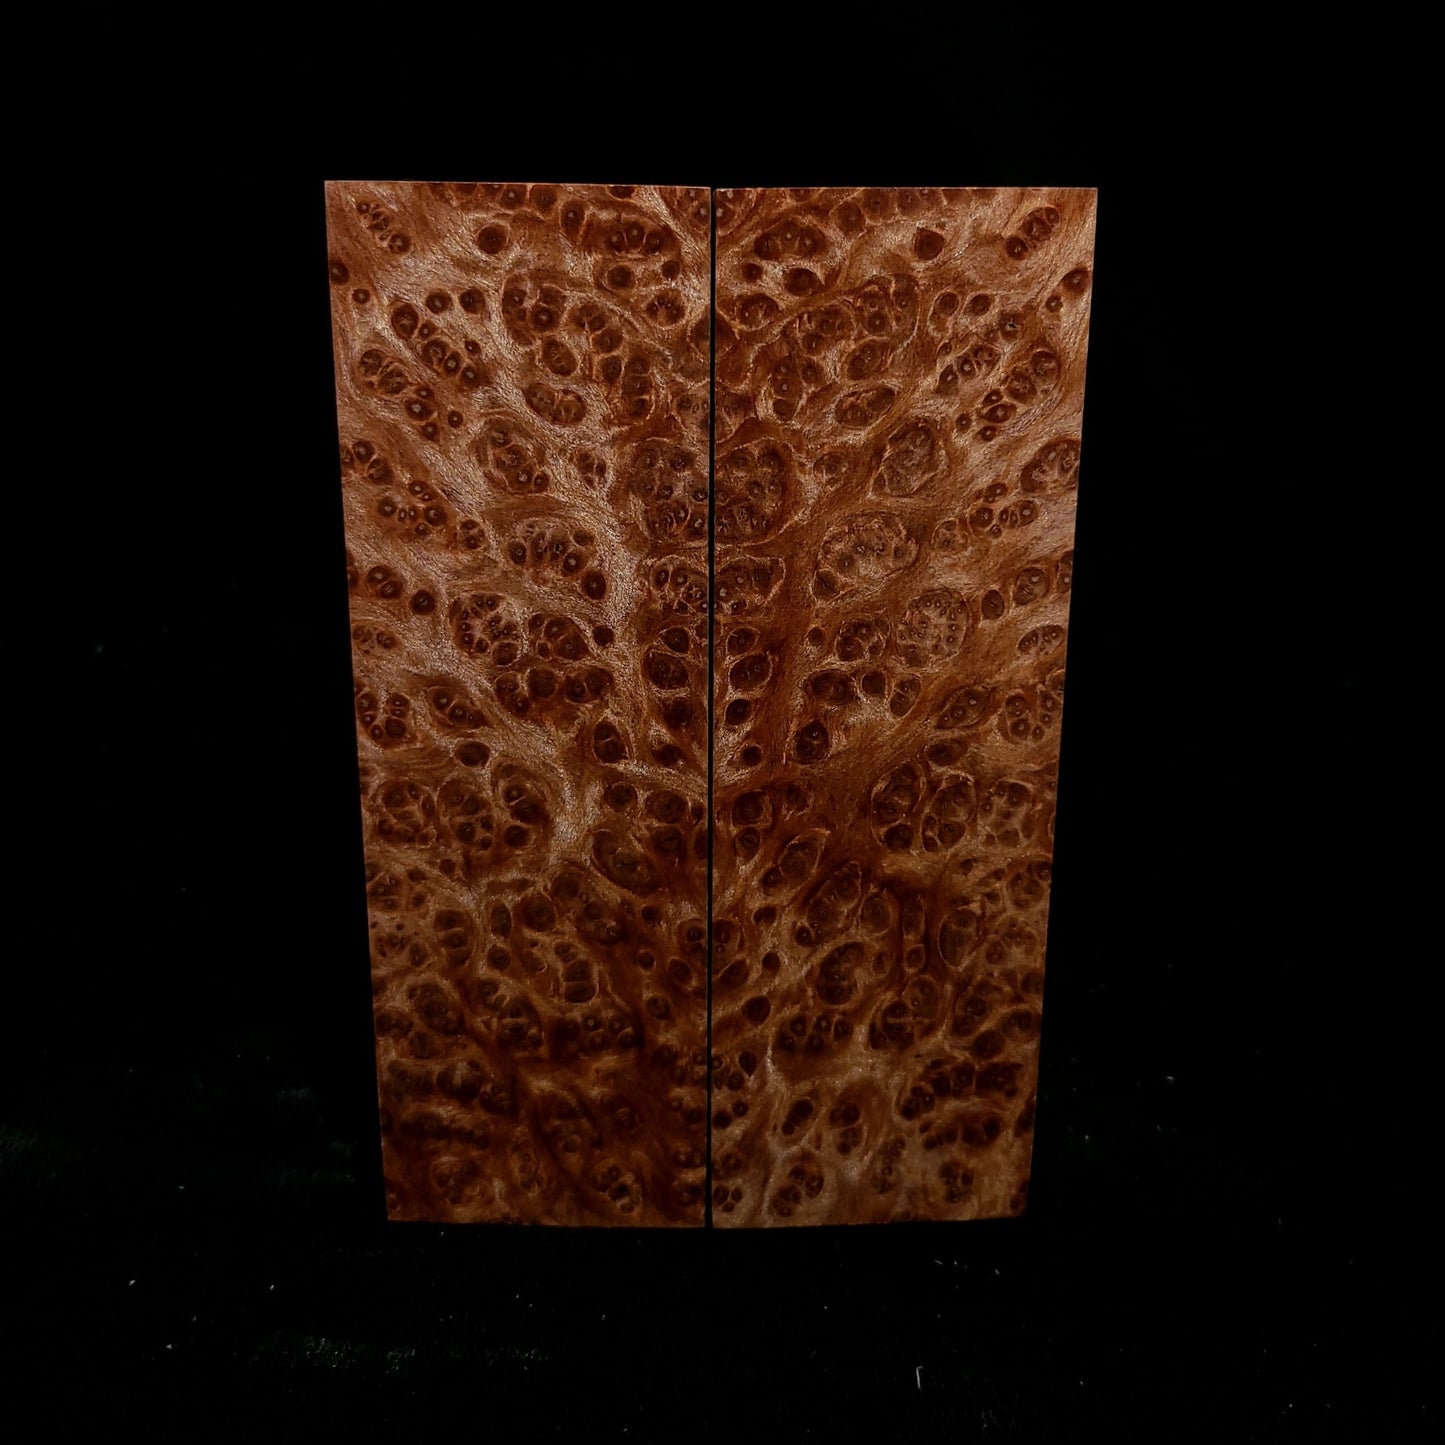 #812 - Redwood Lace Burl - K&G Stabilized - RockSolid Scales -